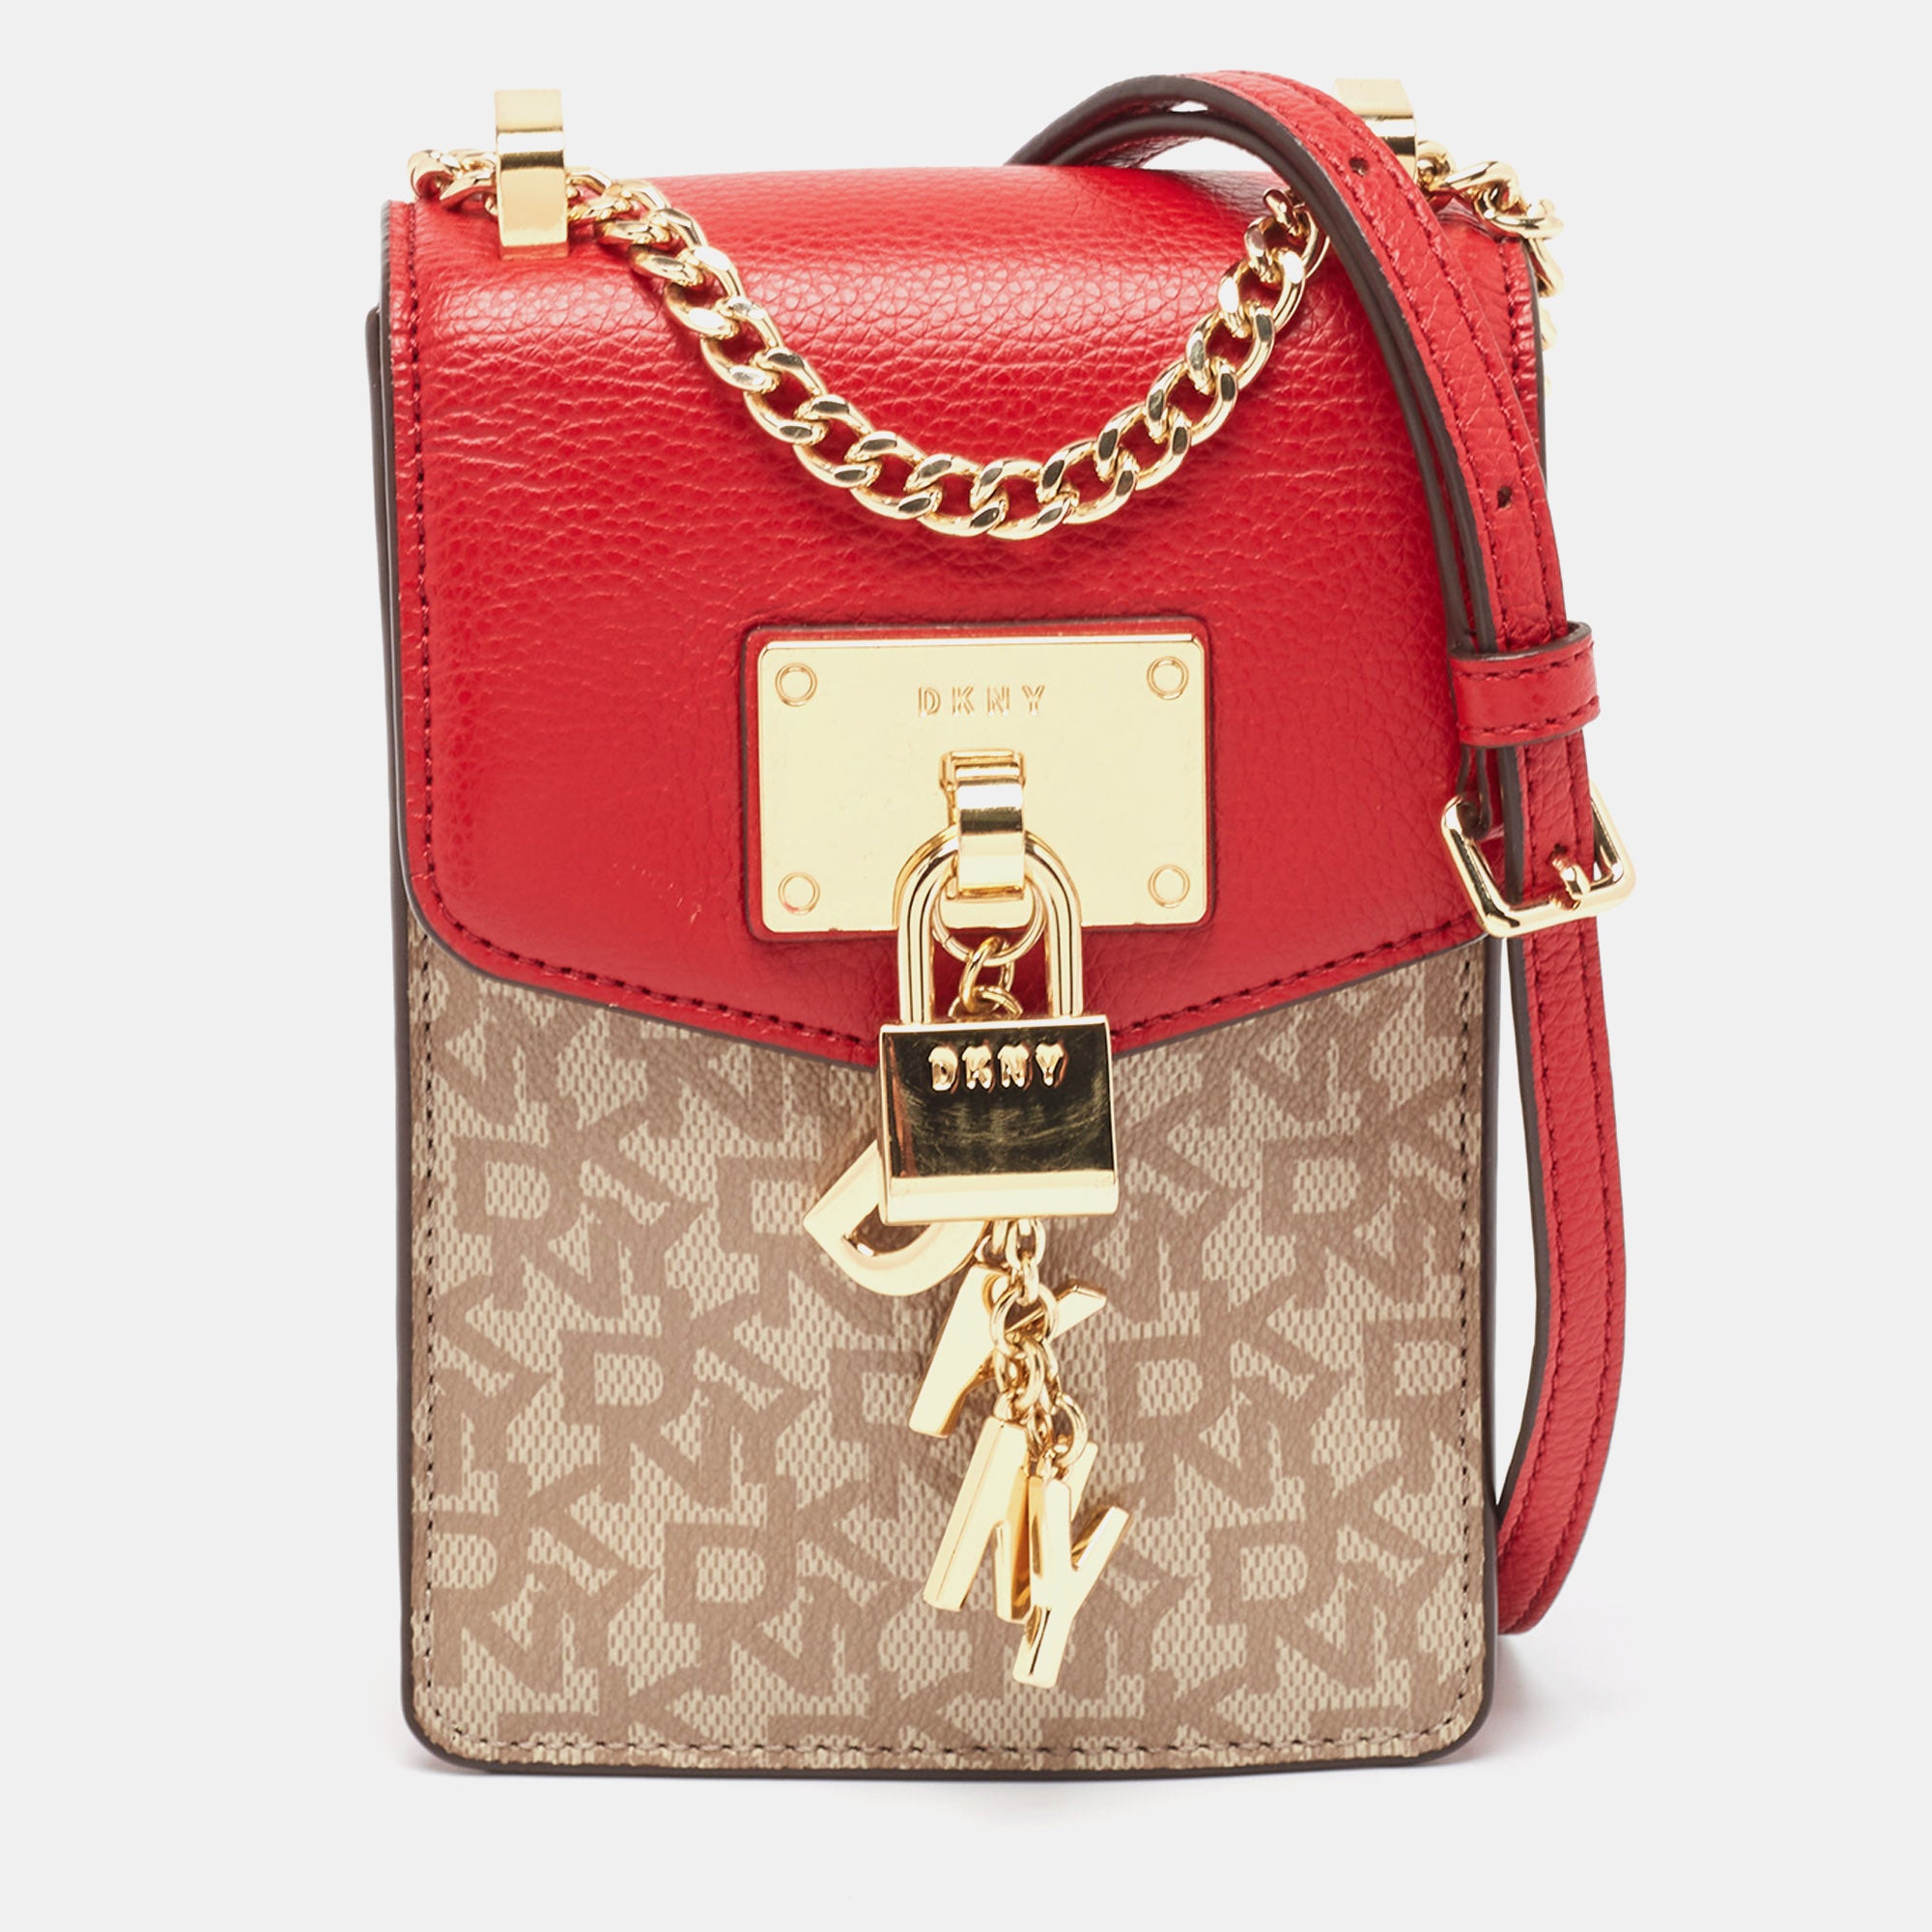 Monogram Coated Canvas And Leather Elissa North South Crossbody Bag